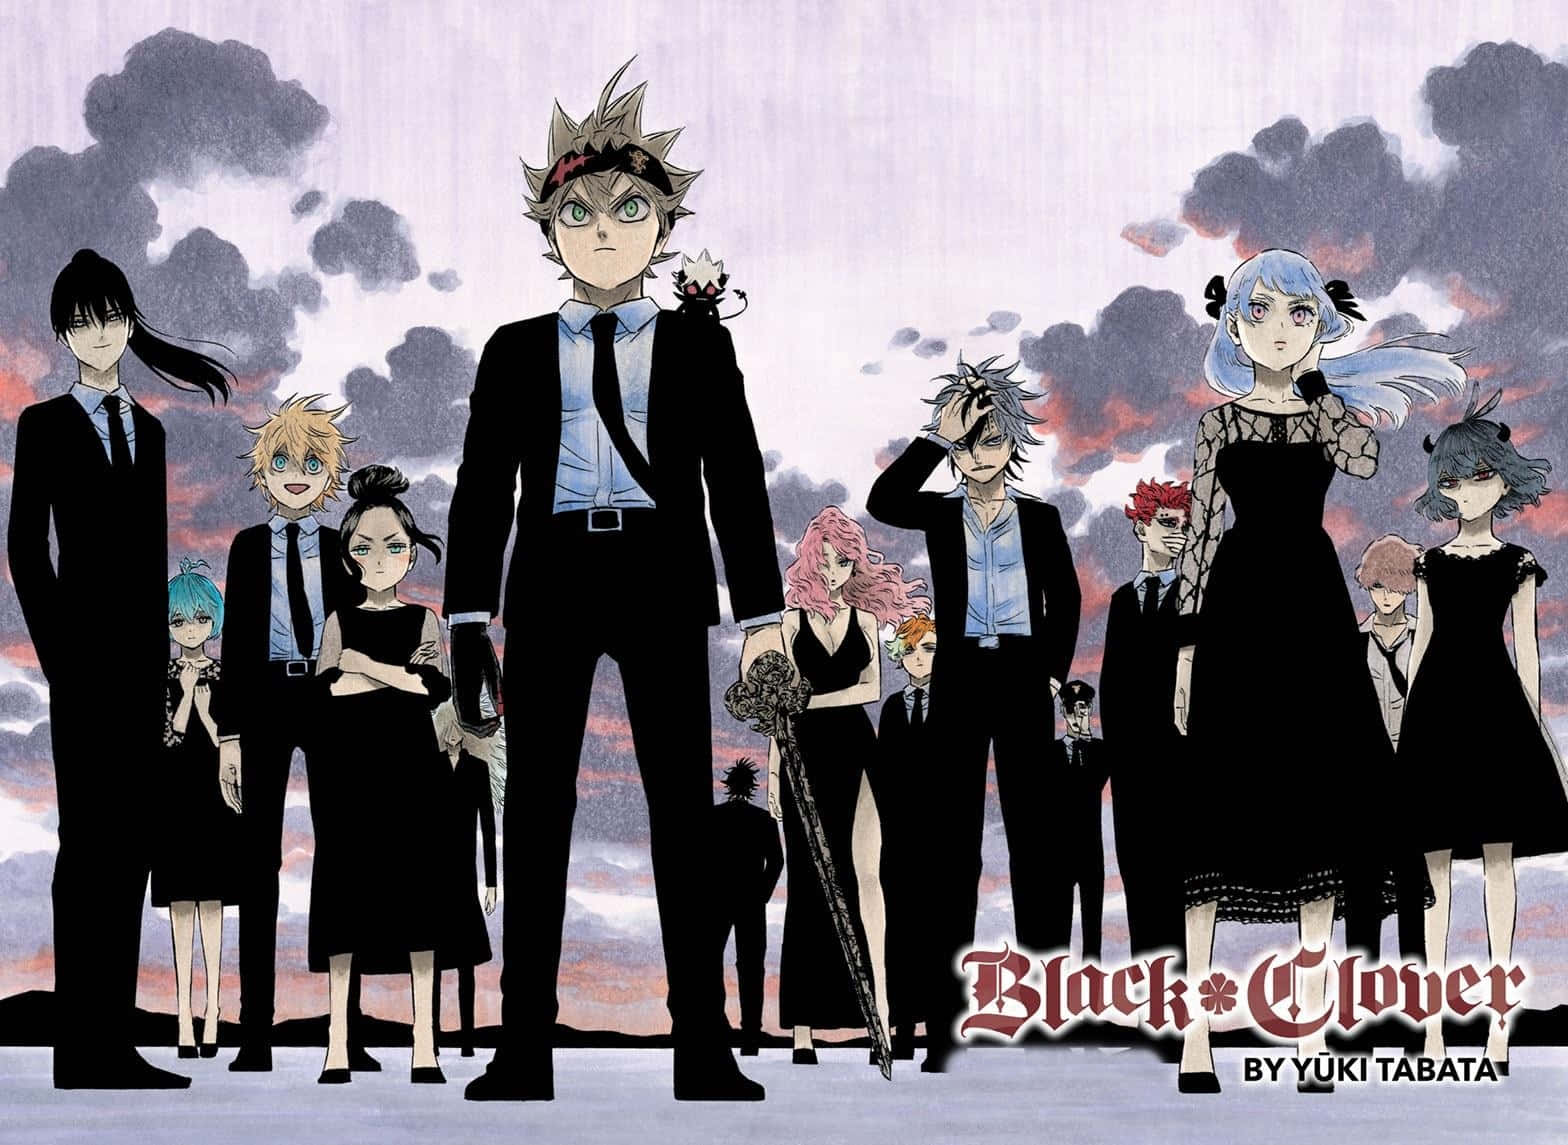 Enter the thrilling world of Black Clover, a land of magic and excitement